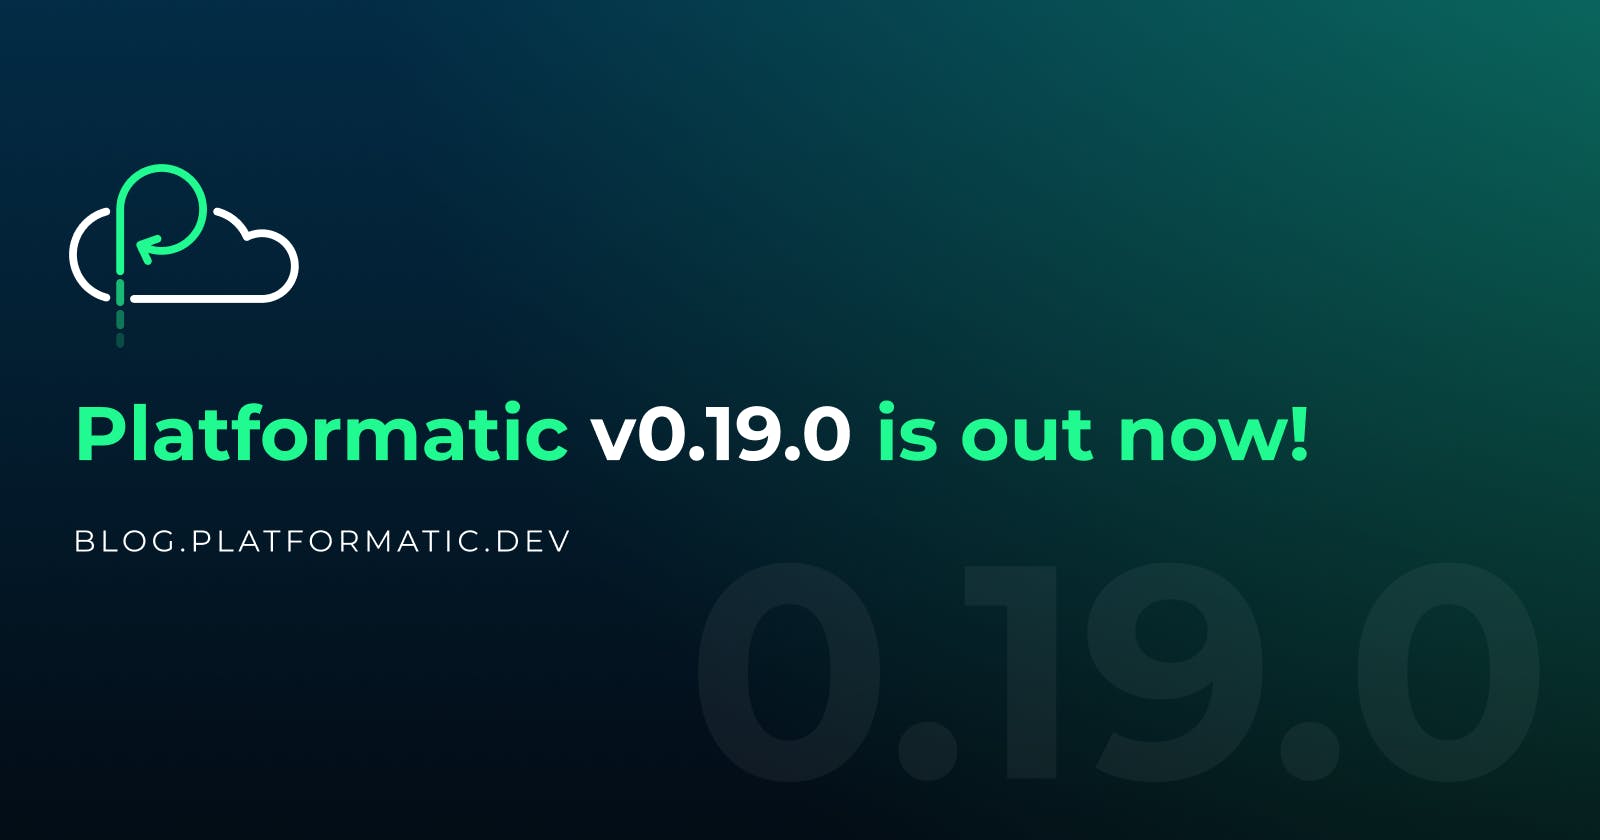 It's Platformatic Client time in the v0.19.0 release!